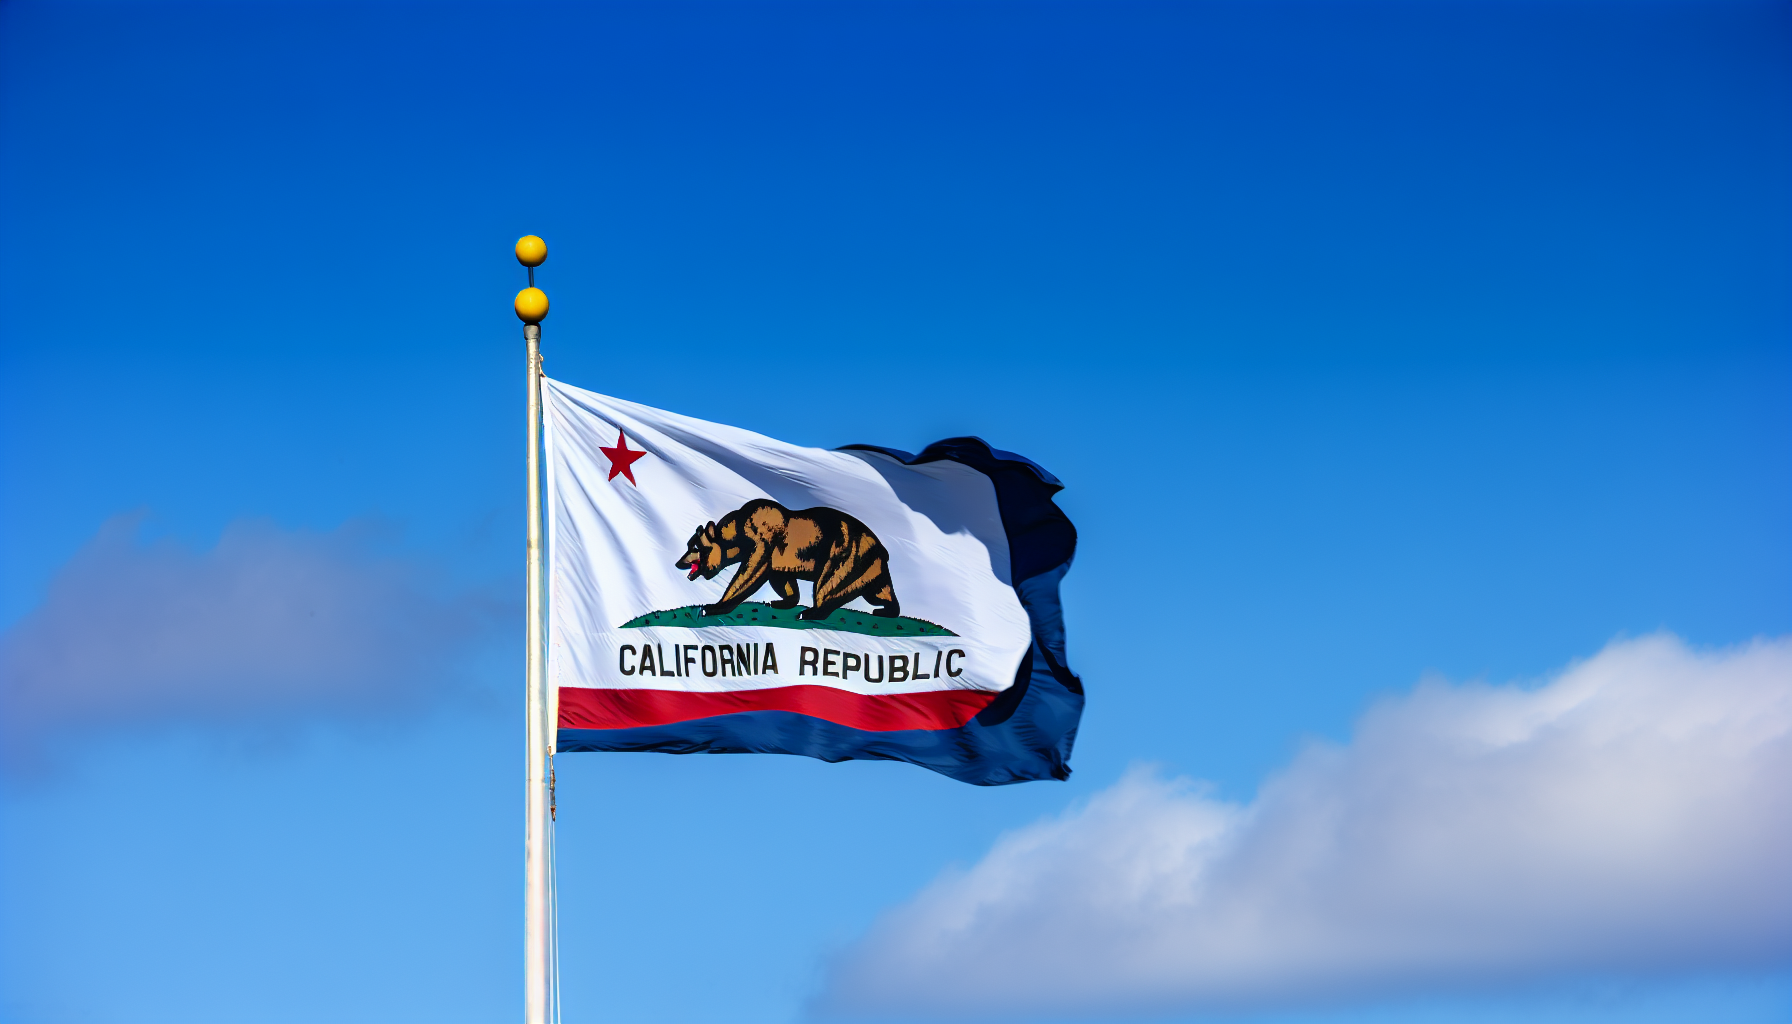 A California state flag flying against a clear blue sky